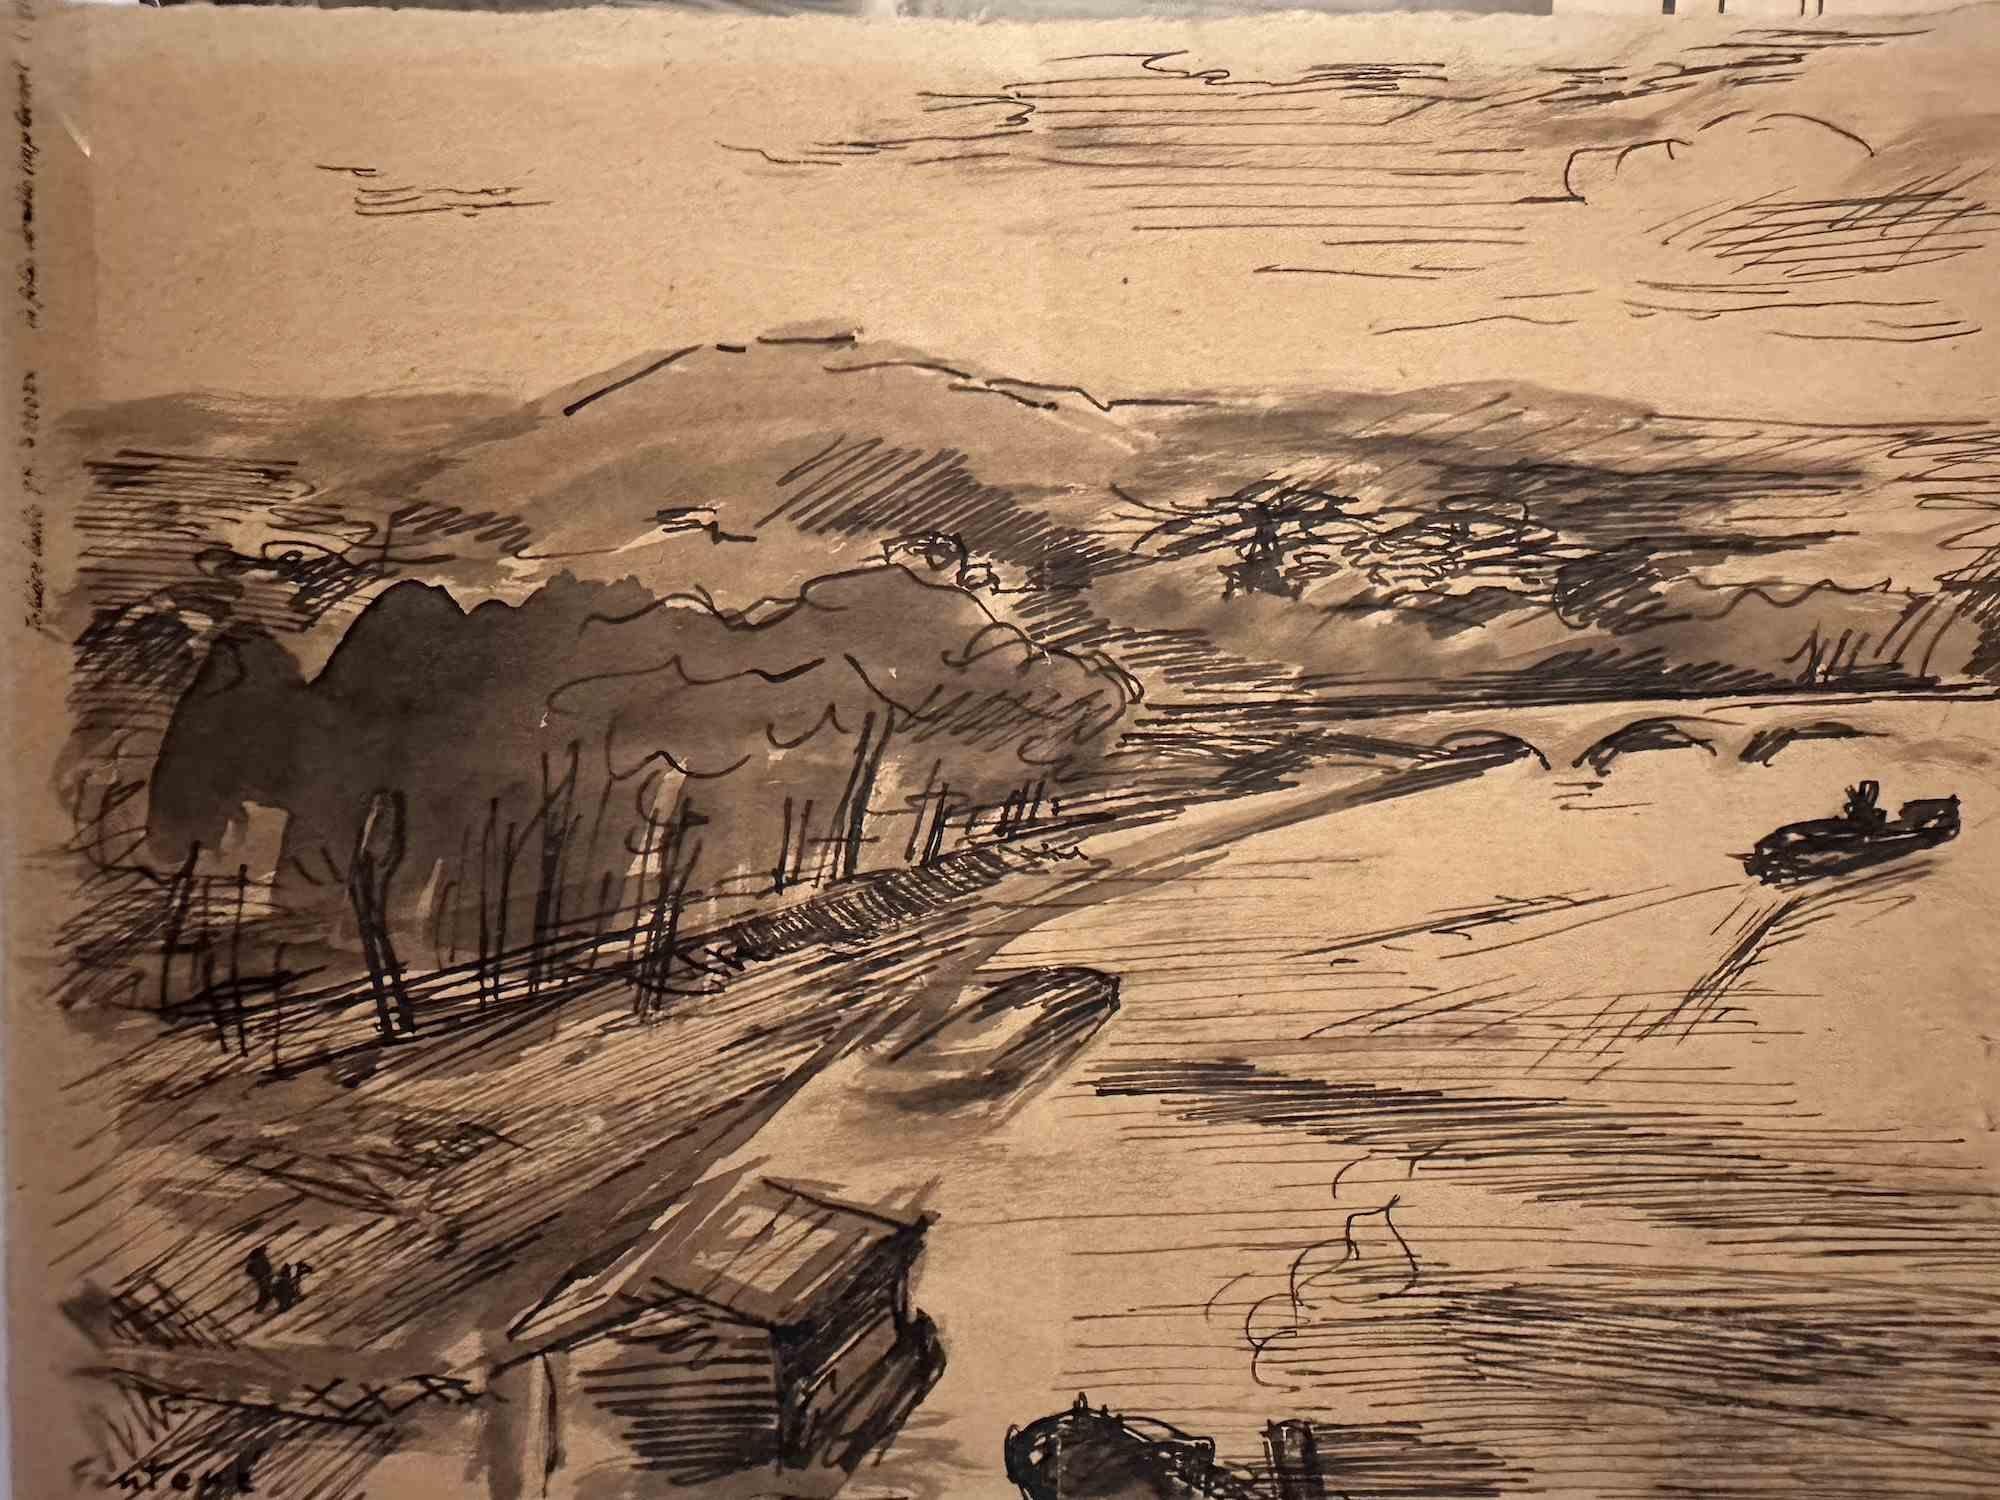 Landscape - Drawing by Robert Fontené - Mid-20th century